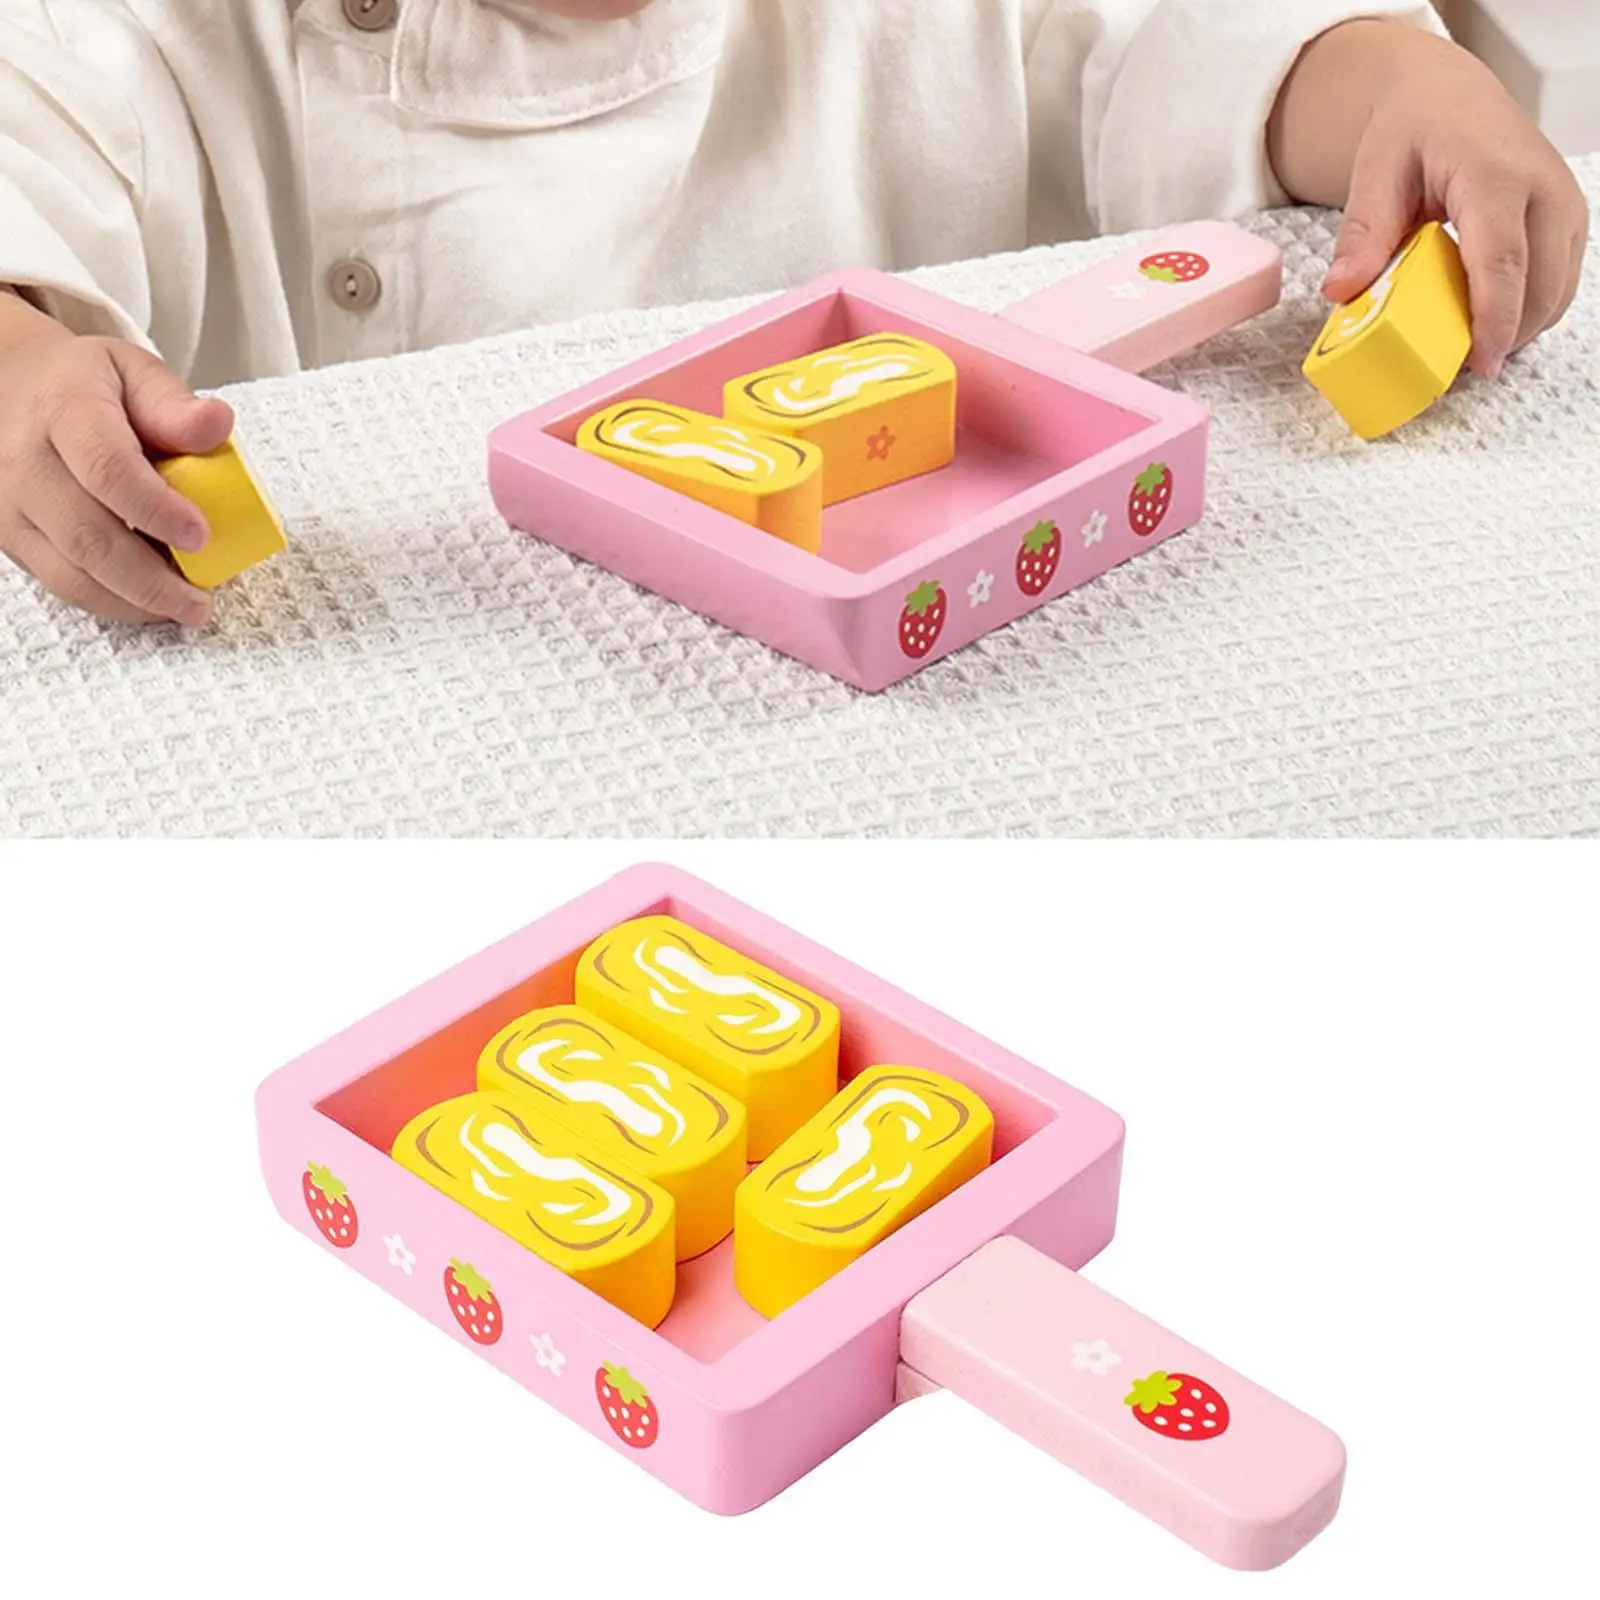 Rice Cake Toy Mini Wooden Play Kitchen Accessories Fake Cooking Cooking Toys Children kitchen Toys for kitchen